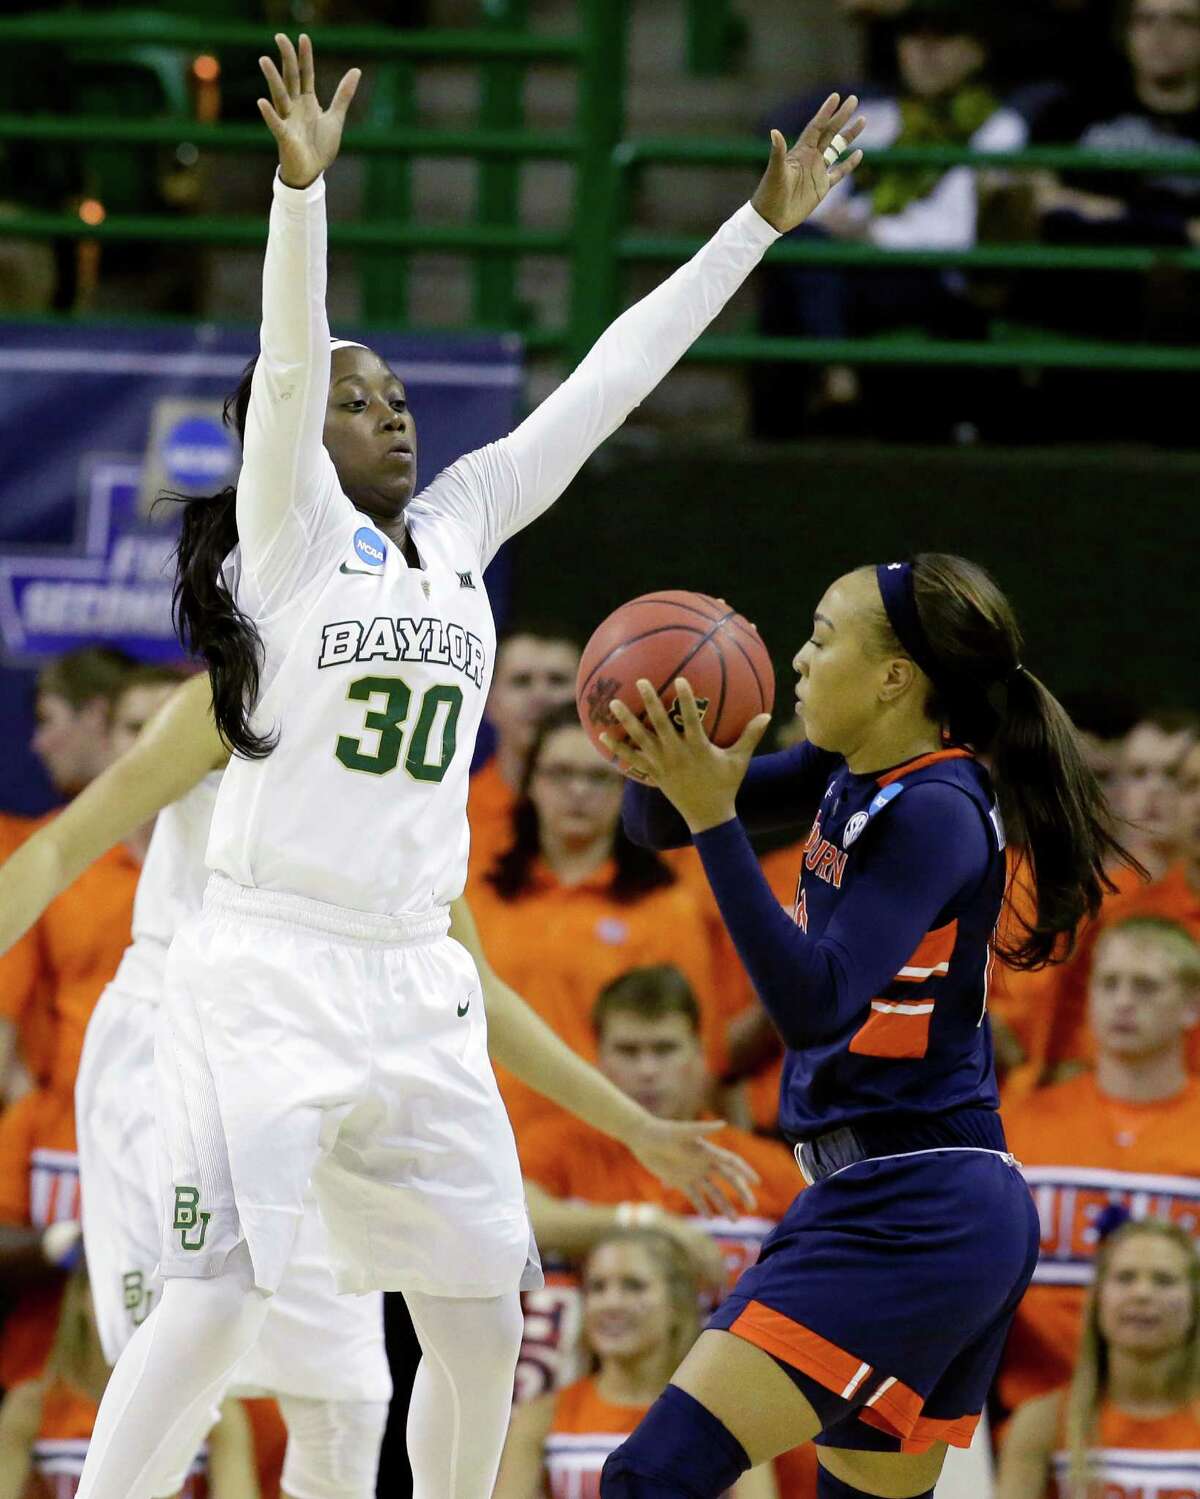 The Baylor-Auburn game was as much of a mismatch as the Lady Bears' Alexis Jones, left, swarming the Tigers' Brandy Montgomery.